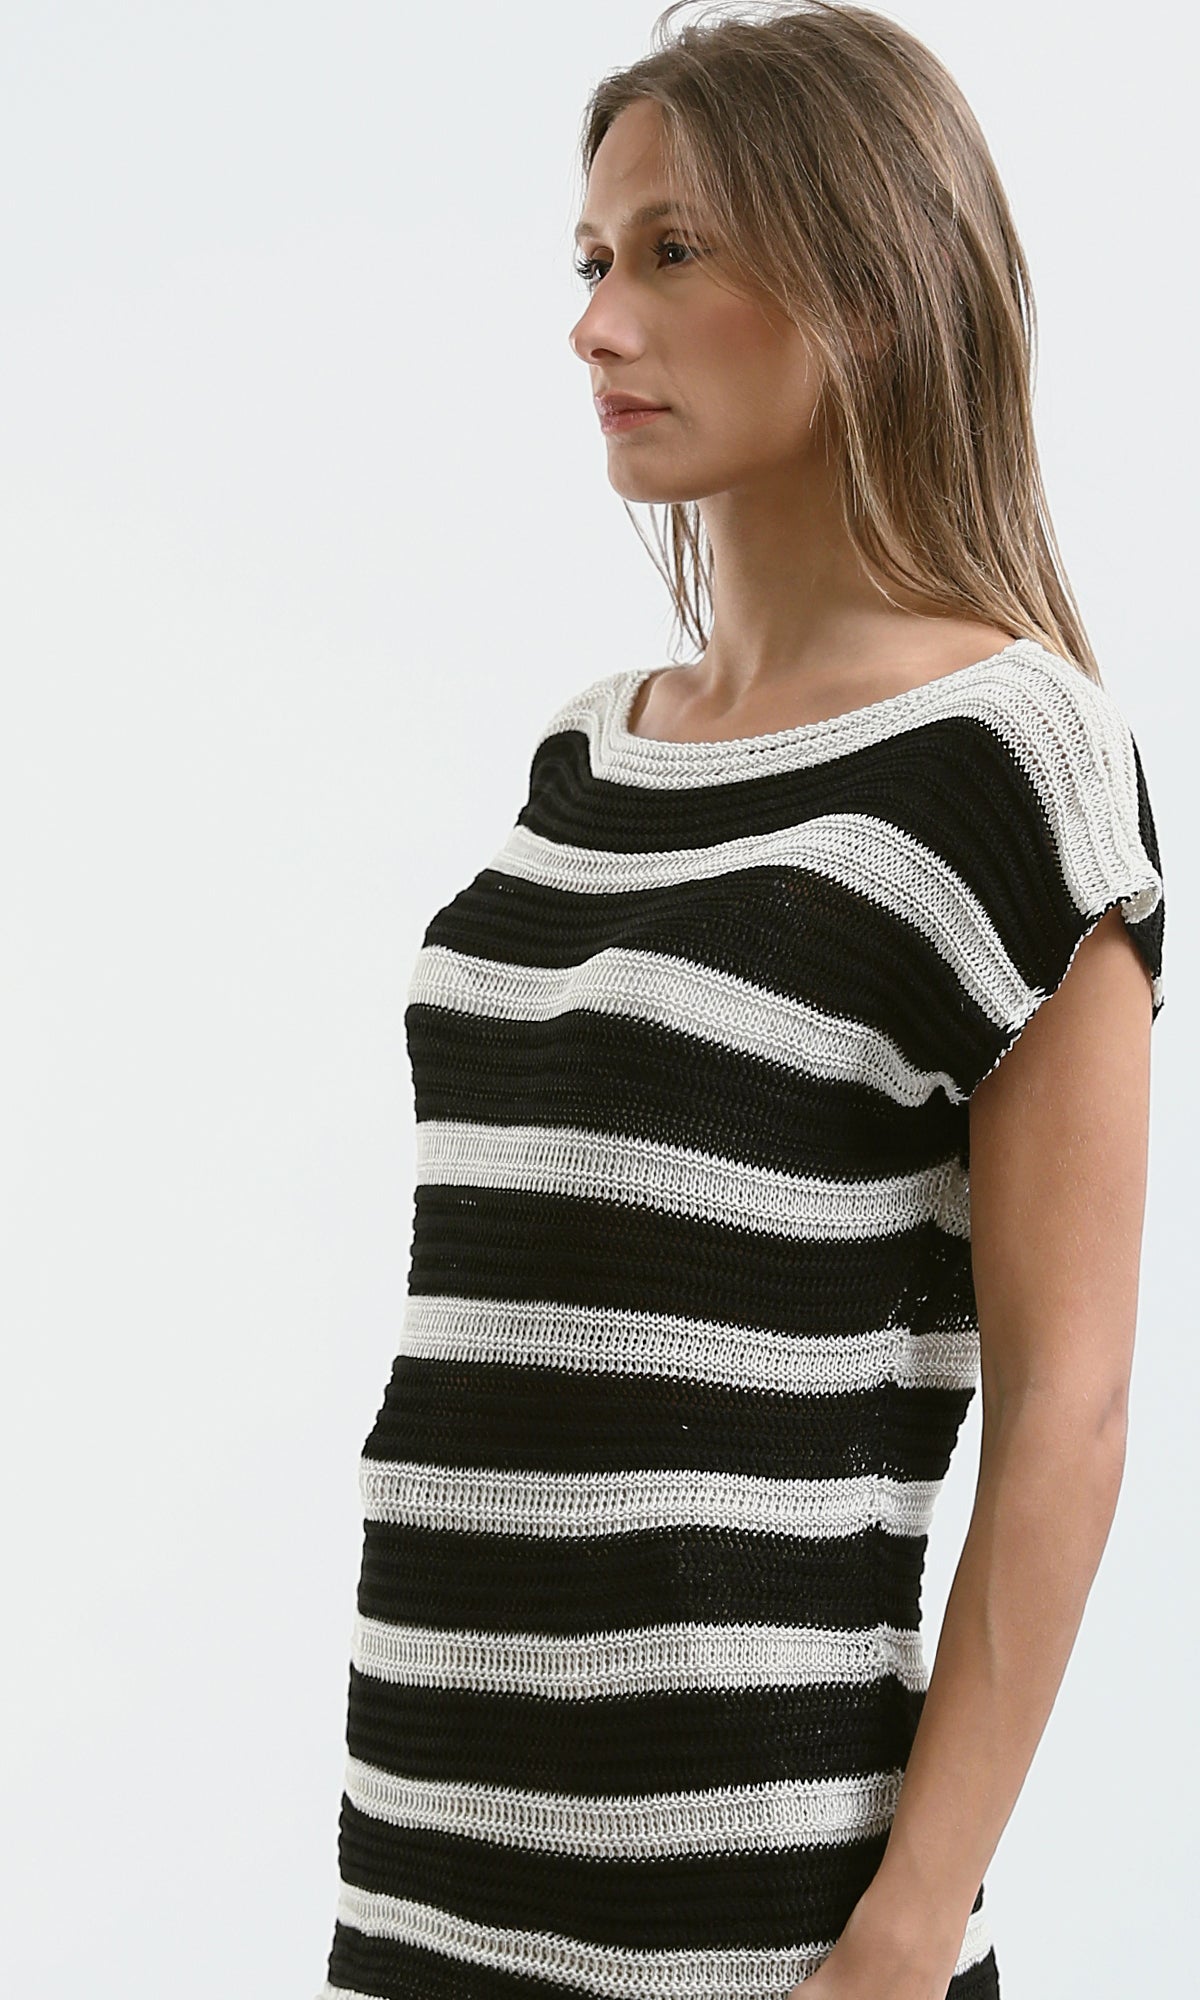 O182709 Casual Boat Neck Black & White Knitted Tee